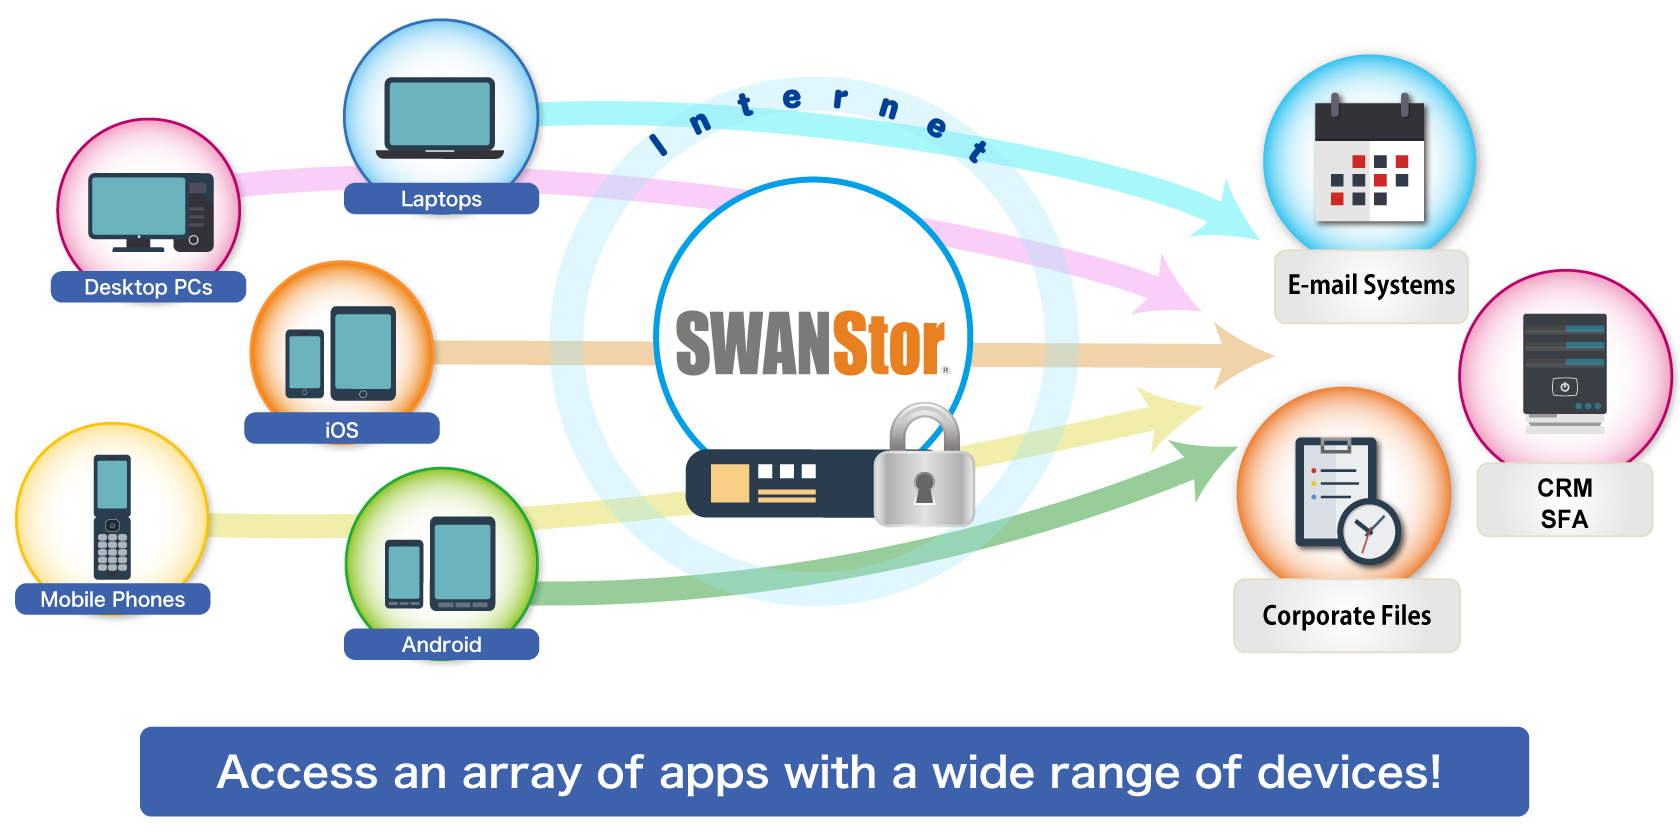 Access an array of apps with a wide range of devices!